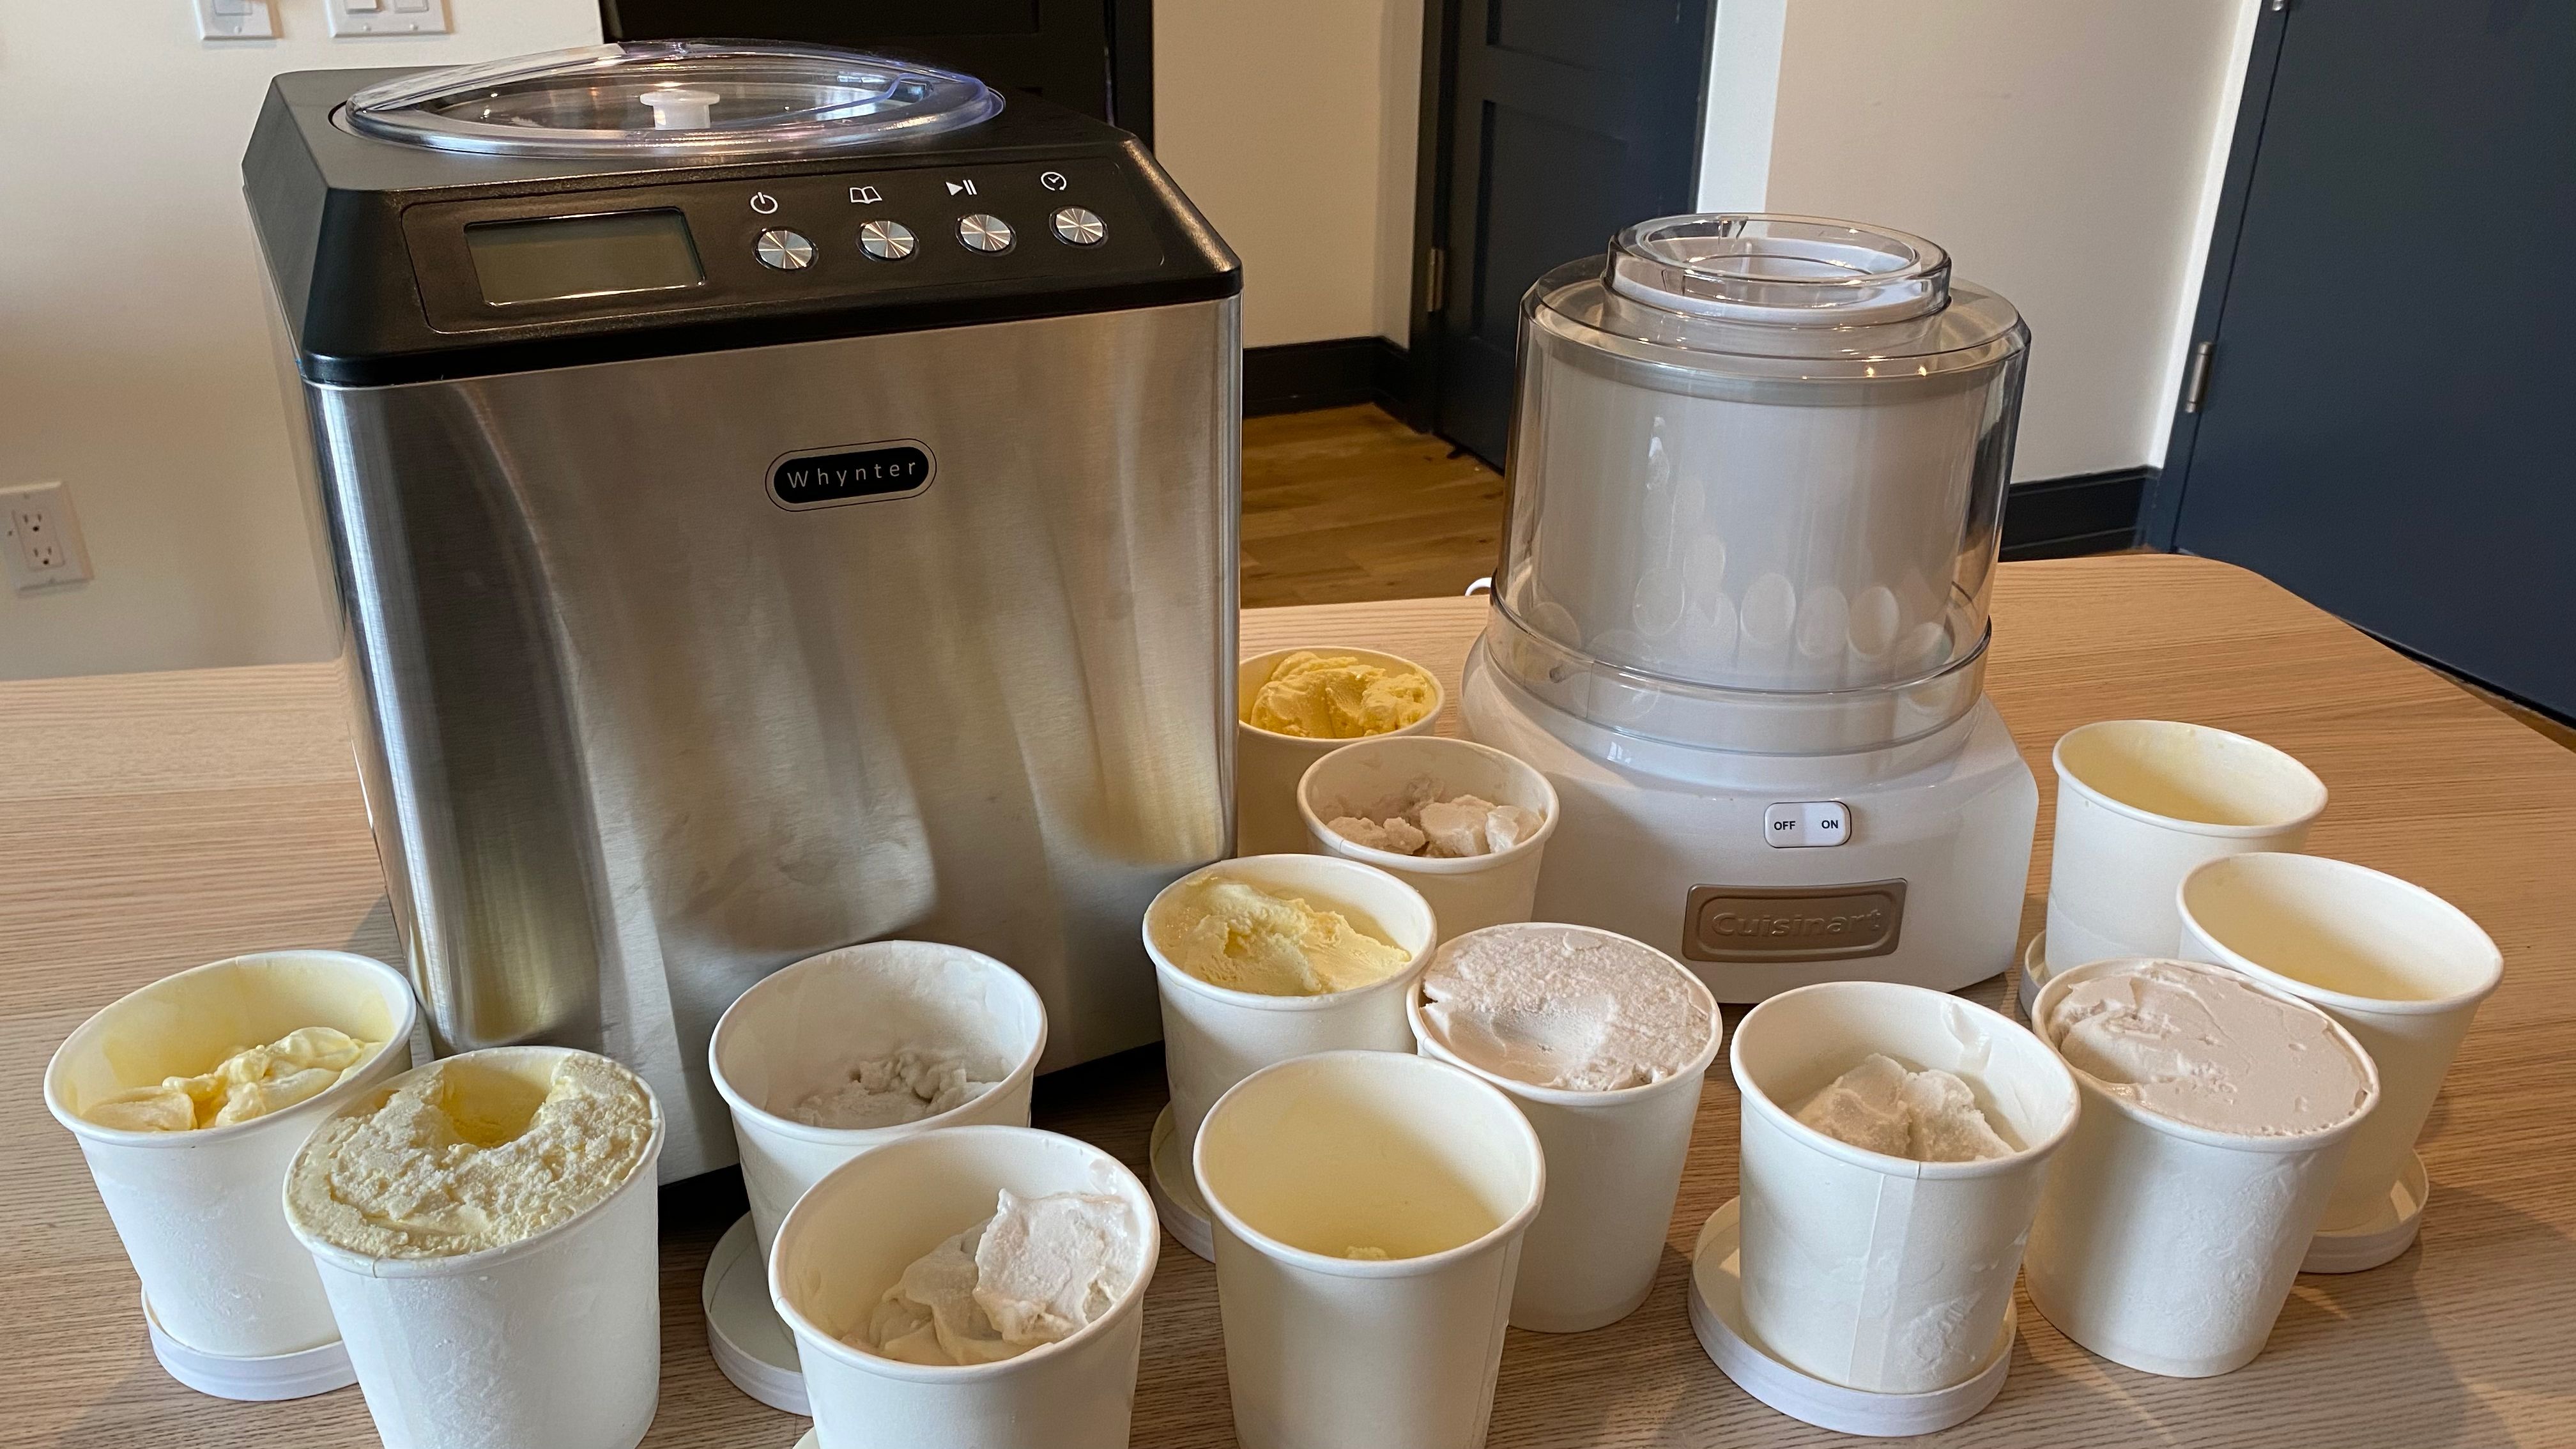 Is the Most Expensive Home Ice Cream Maker Actually the Best